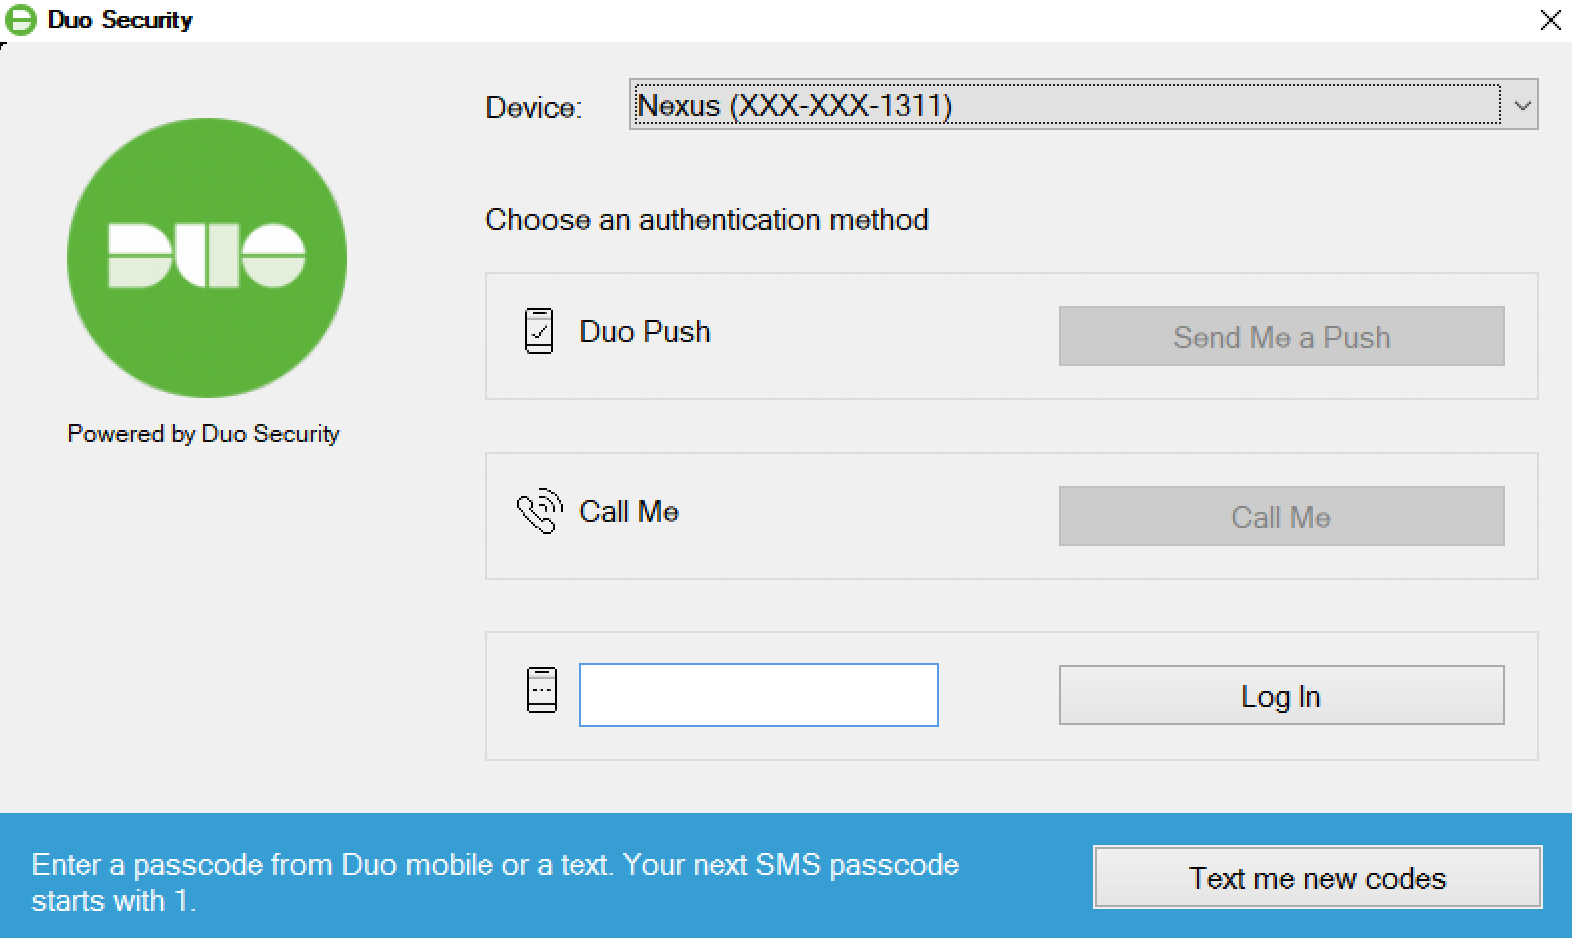 Duo Authentication with Passcode